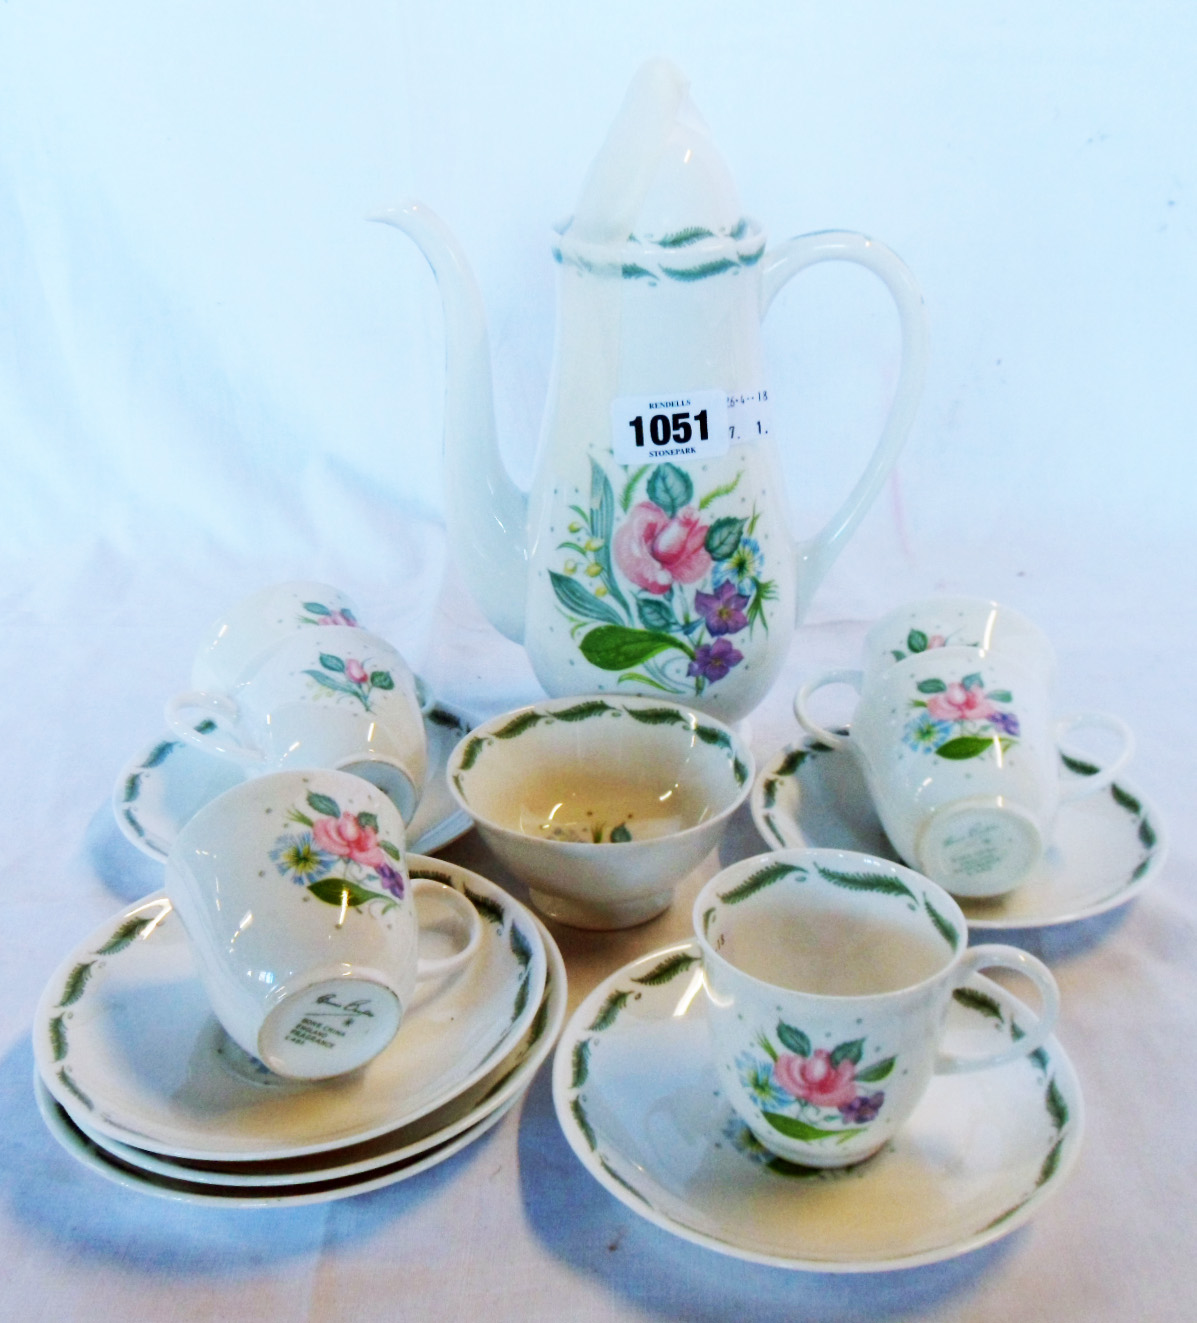 A Susie Cooper Fragrance pattern part coffee set including coffee pot and sugar bowl